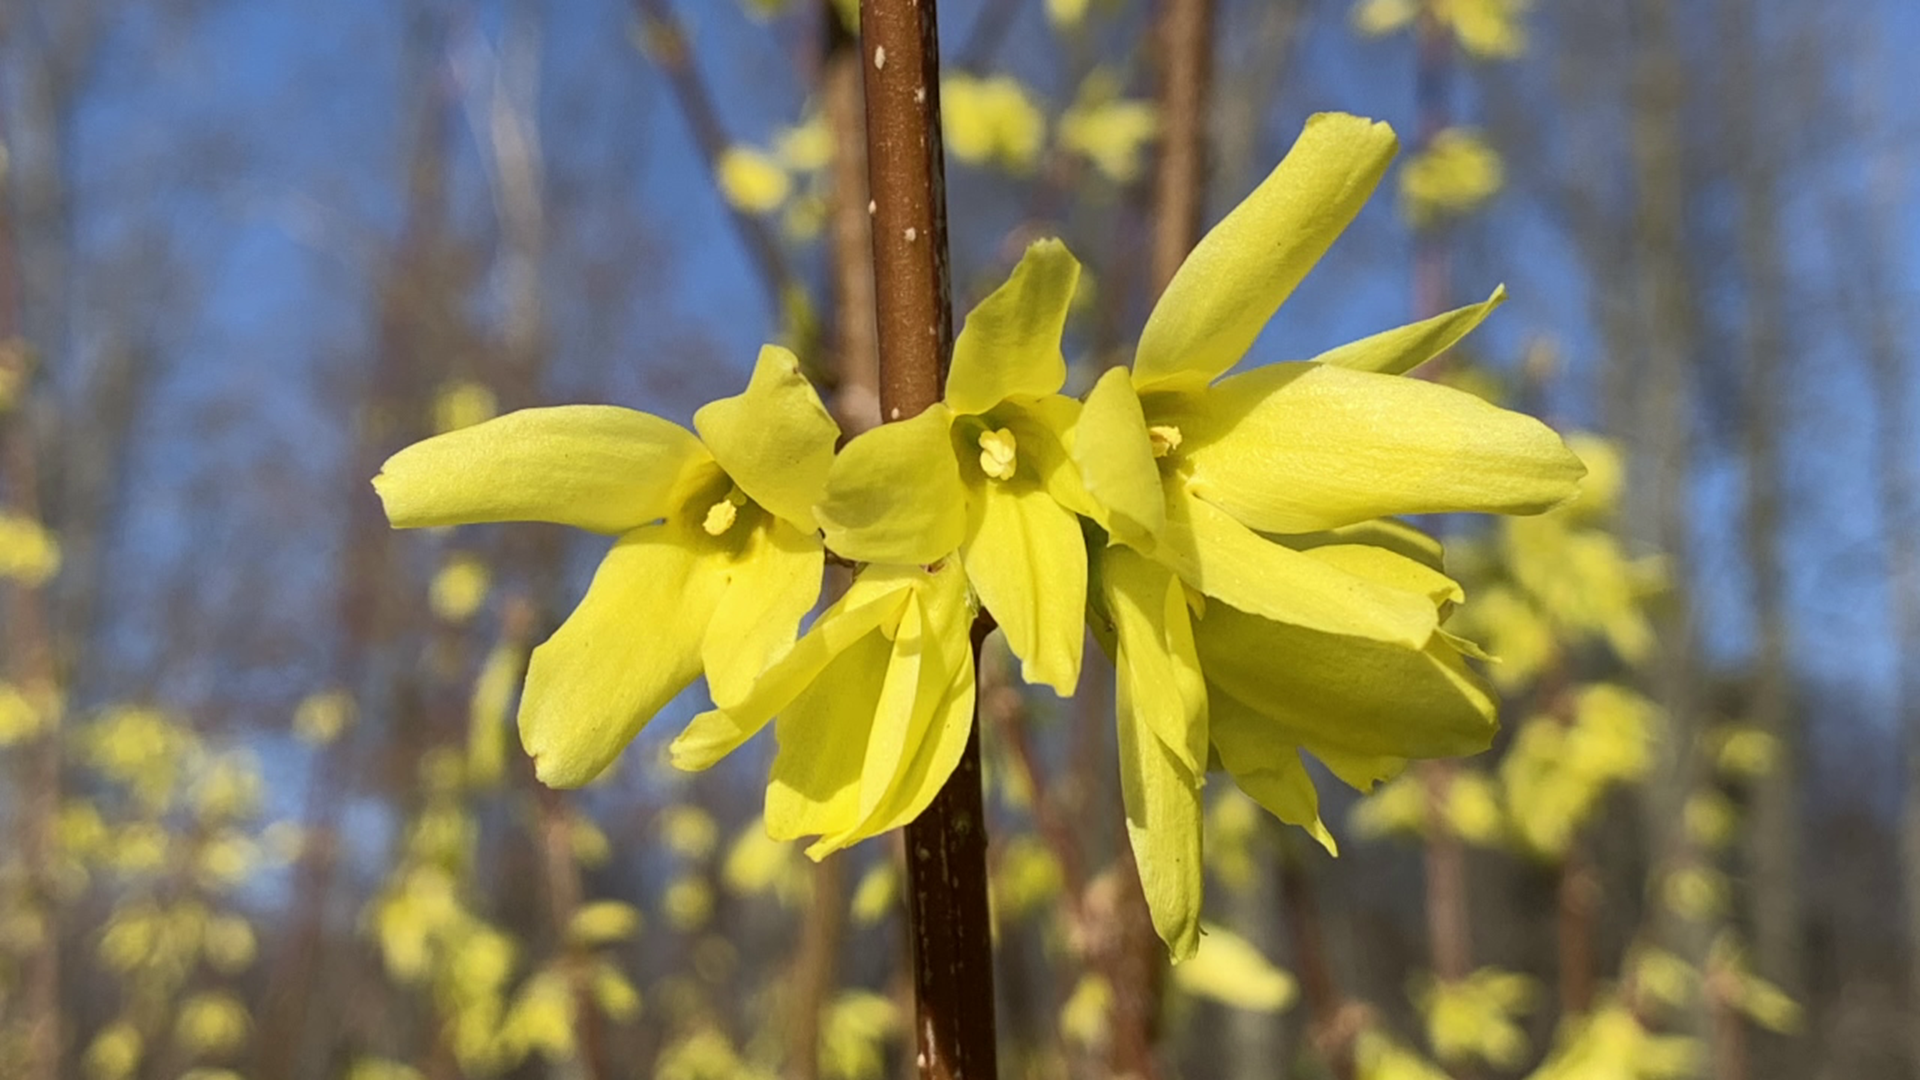 Forsythia are a sign of hope every year, even on cold spring days that warmer, better days are coming.